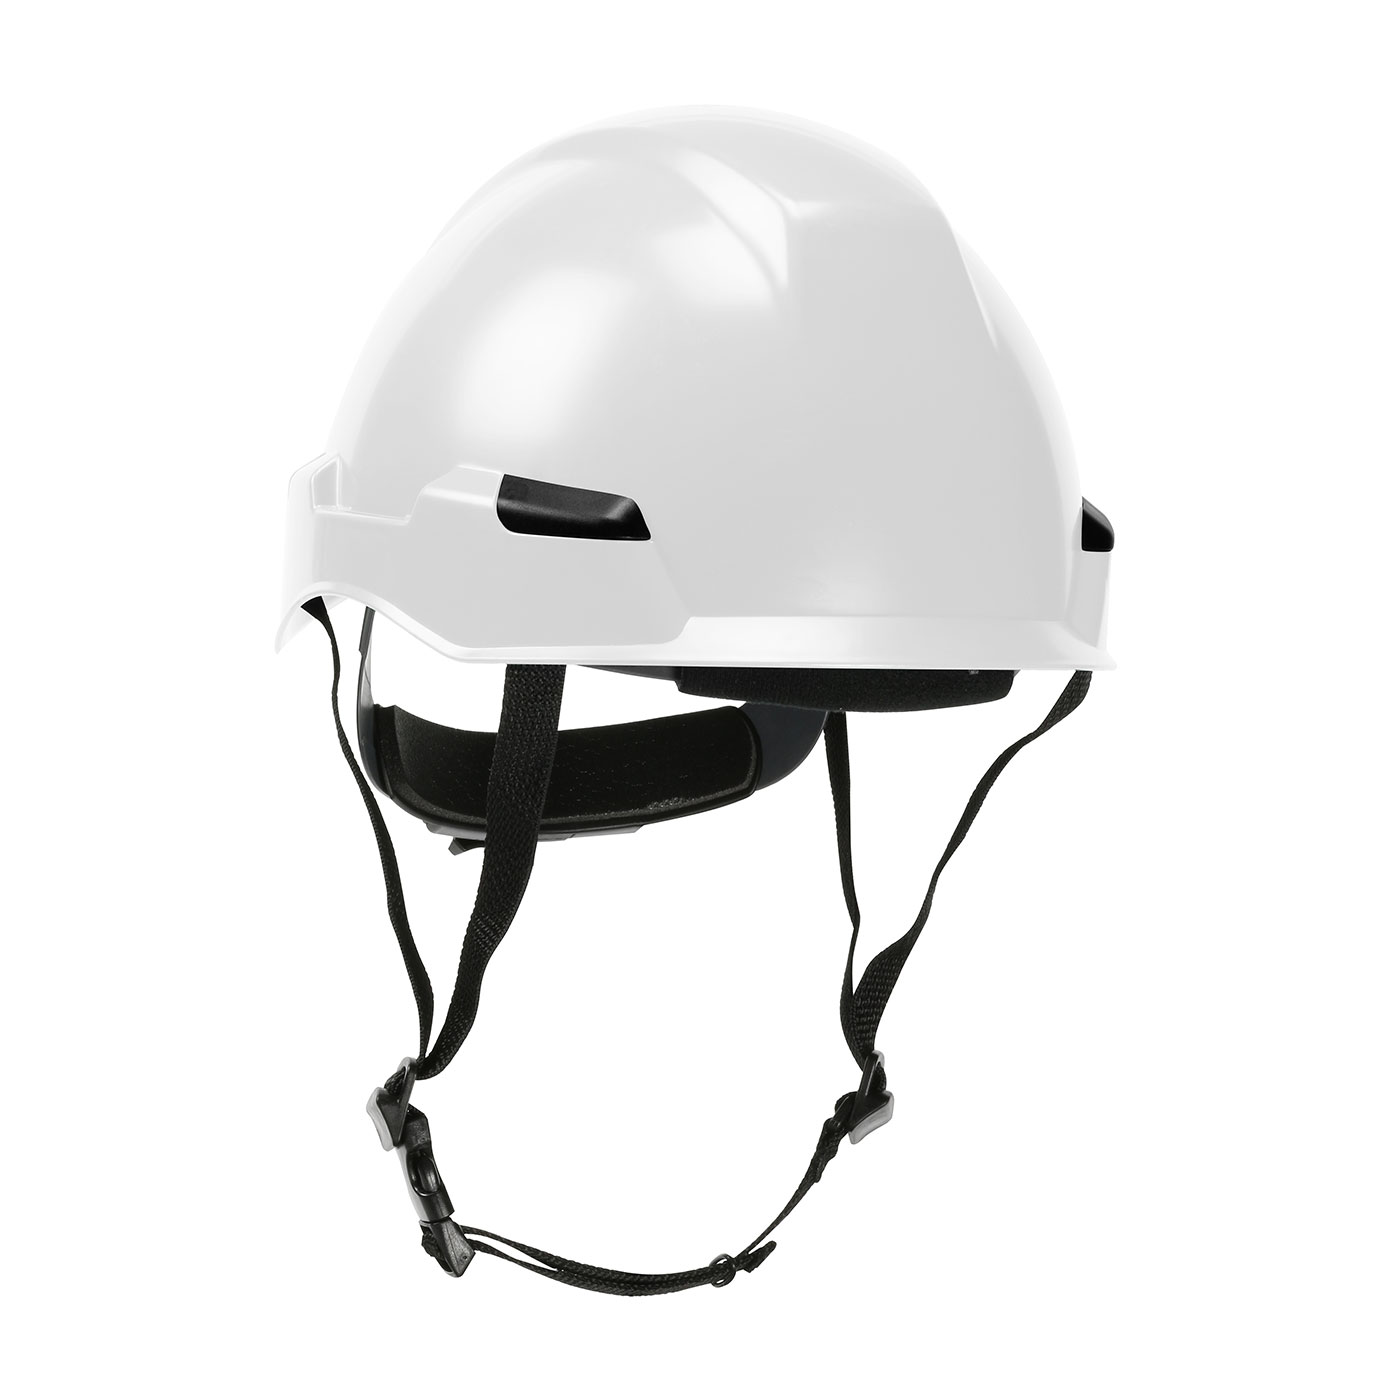 280-HP142R PIP® Dynamic Rocky™ Industrial Climbing Helmet with Polycarbonate / ABS Shell, Hi-Density Foam Impact Liner, Nylon Suspension, Wheel Ratchet Adjustment and 4-Point Chin Strap- White